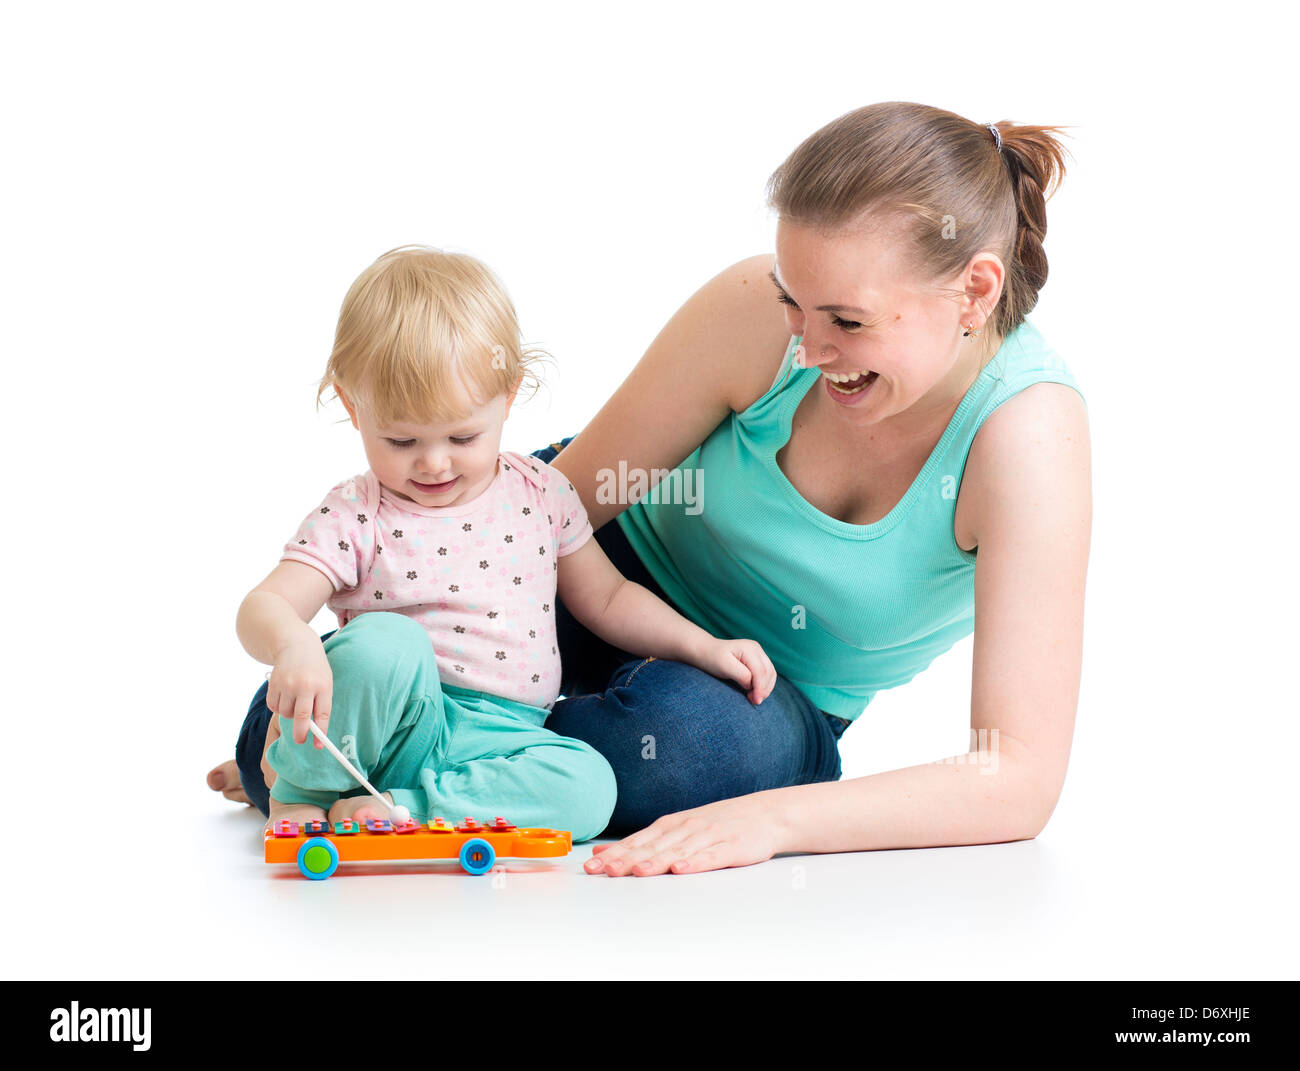 Mother and baby girl having fun with musical toy. Isolated on white background Stock Photo